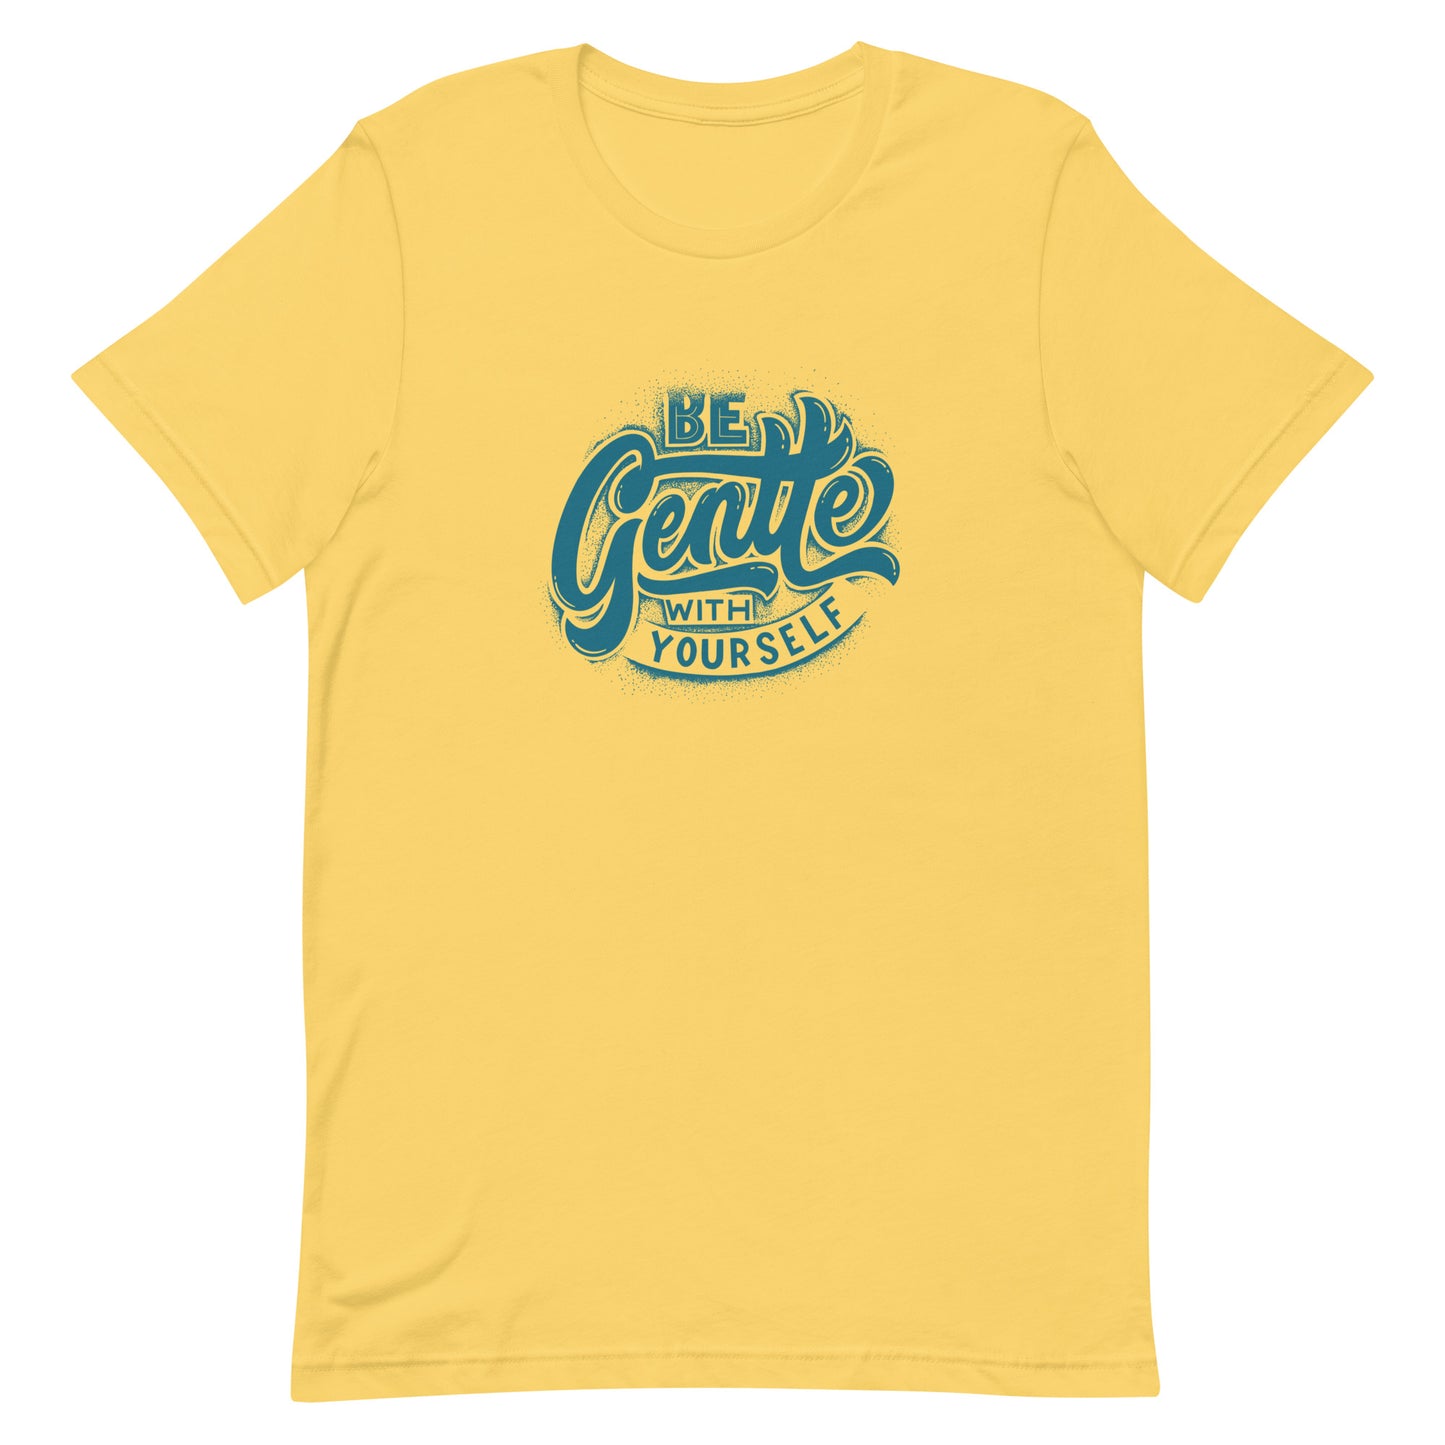 Be Gentle With Yourself t-shirt